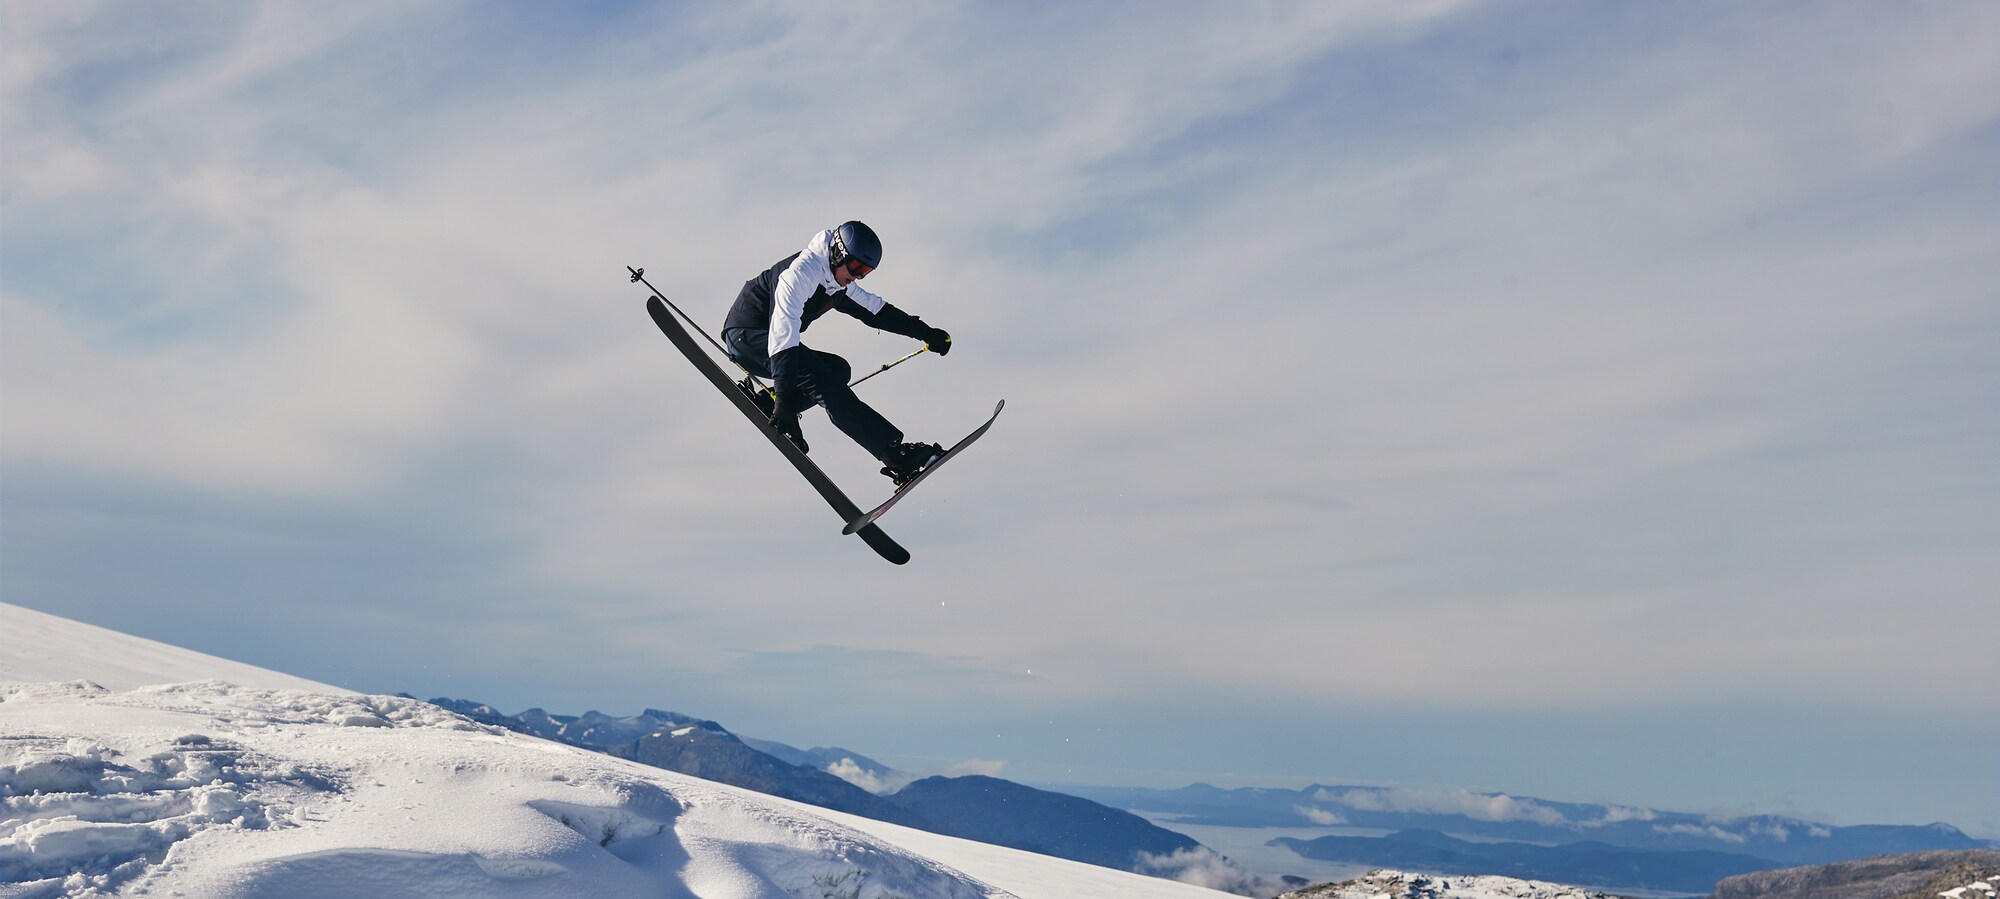 Everything for the slopes Ski & snowboard essentials